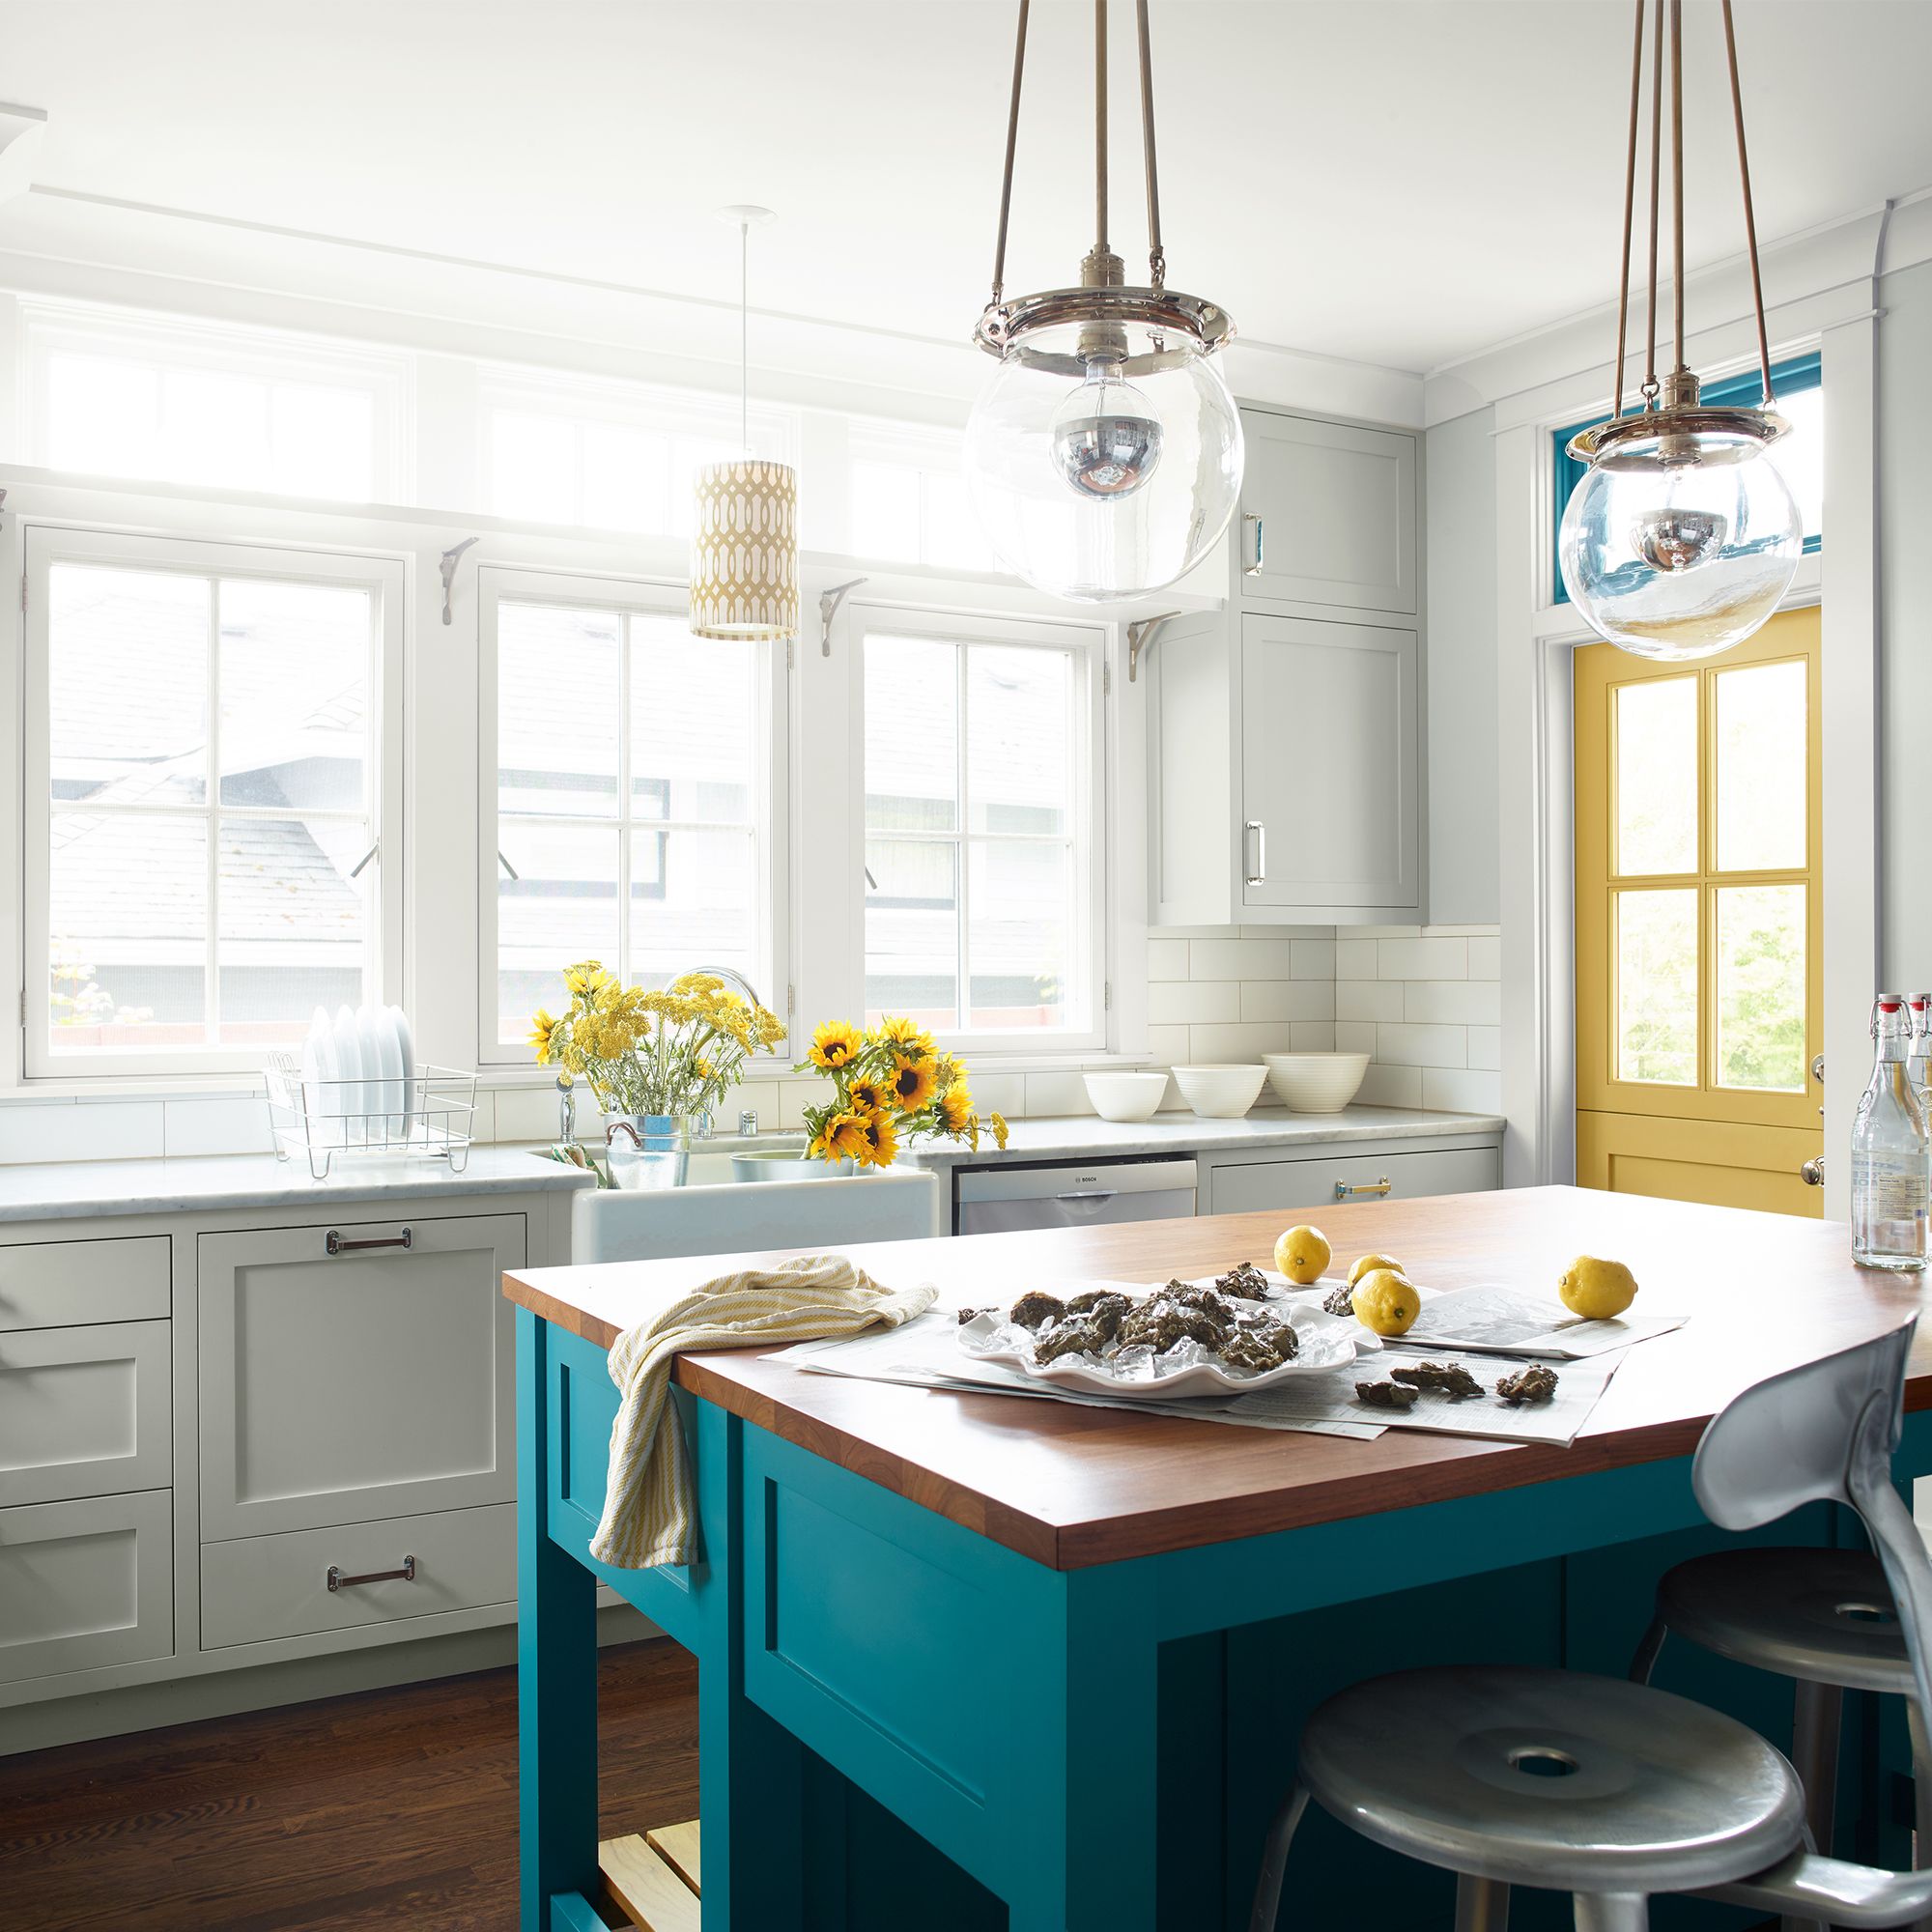 Benjamin Moore Owl Gray OC-52 kitchen cabinetry with a turquoise island and yellow accents